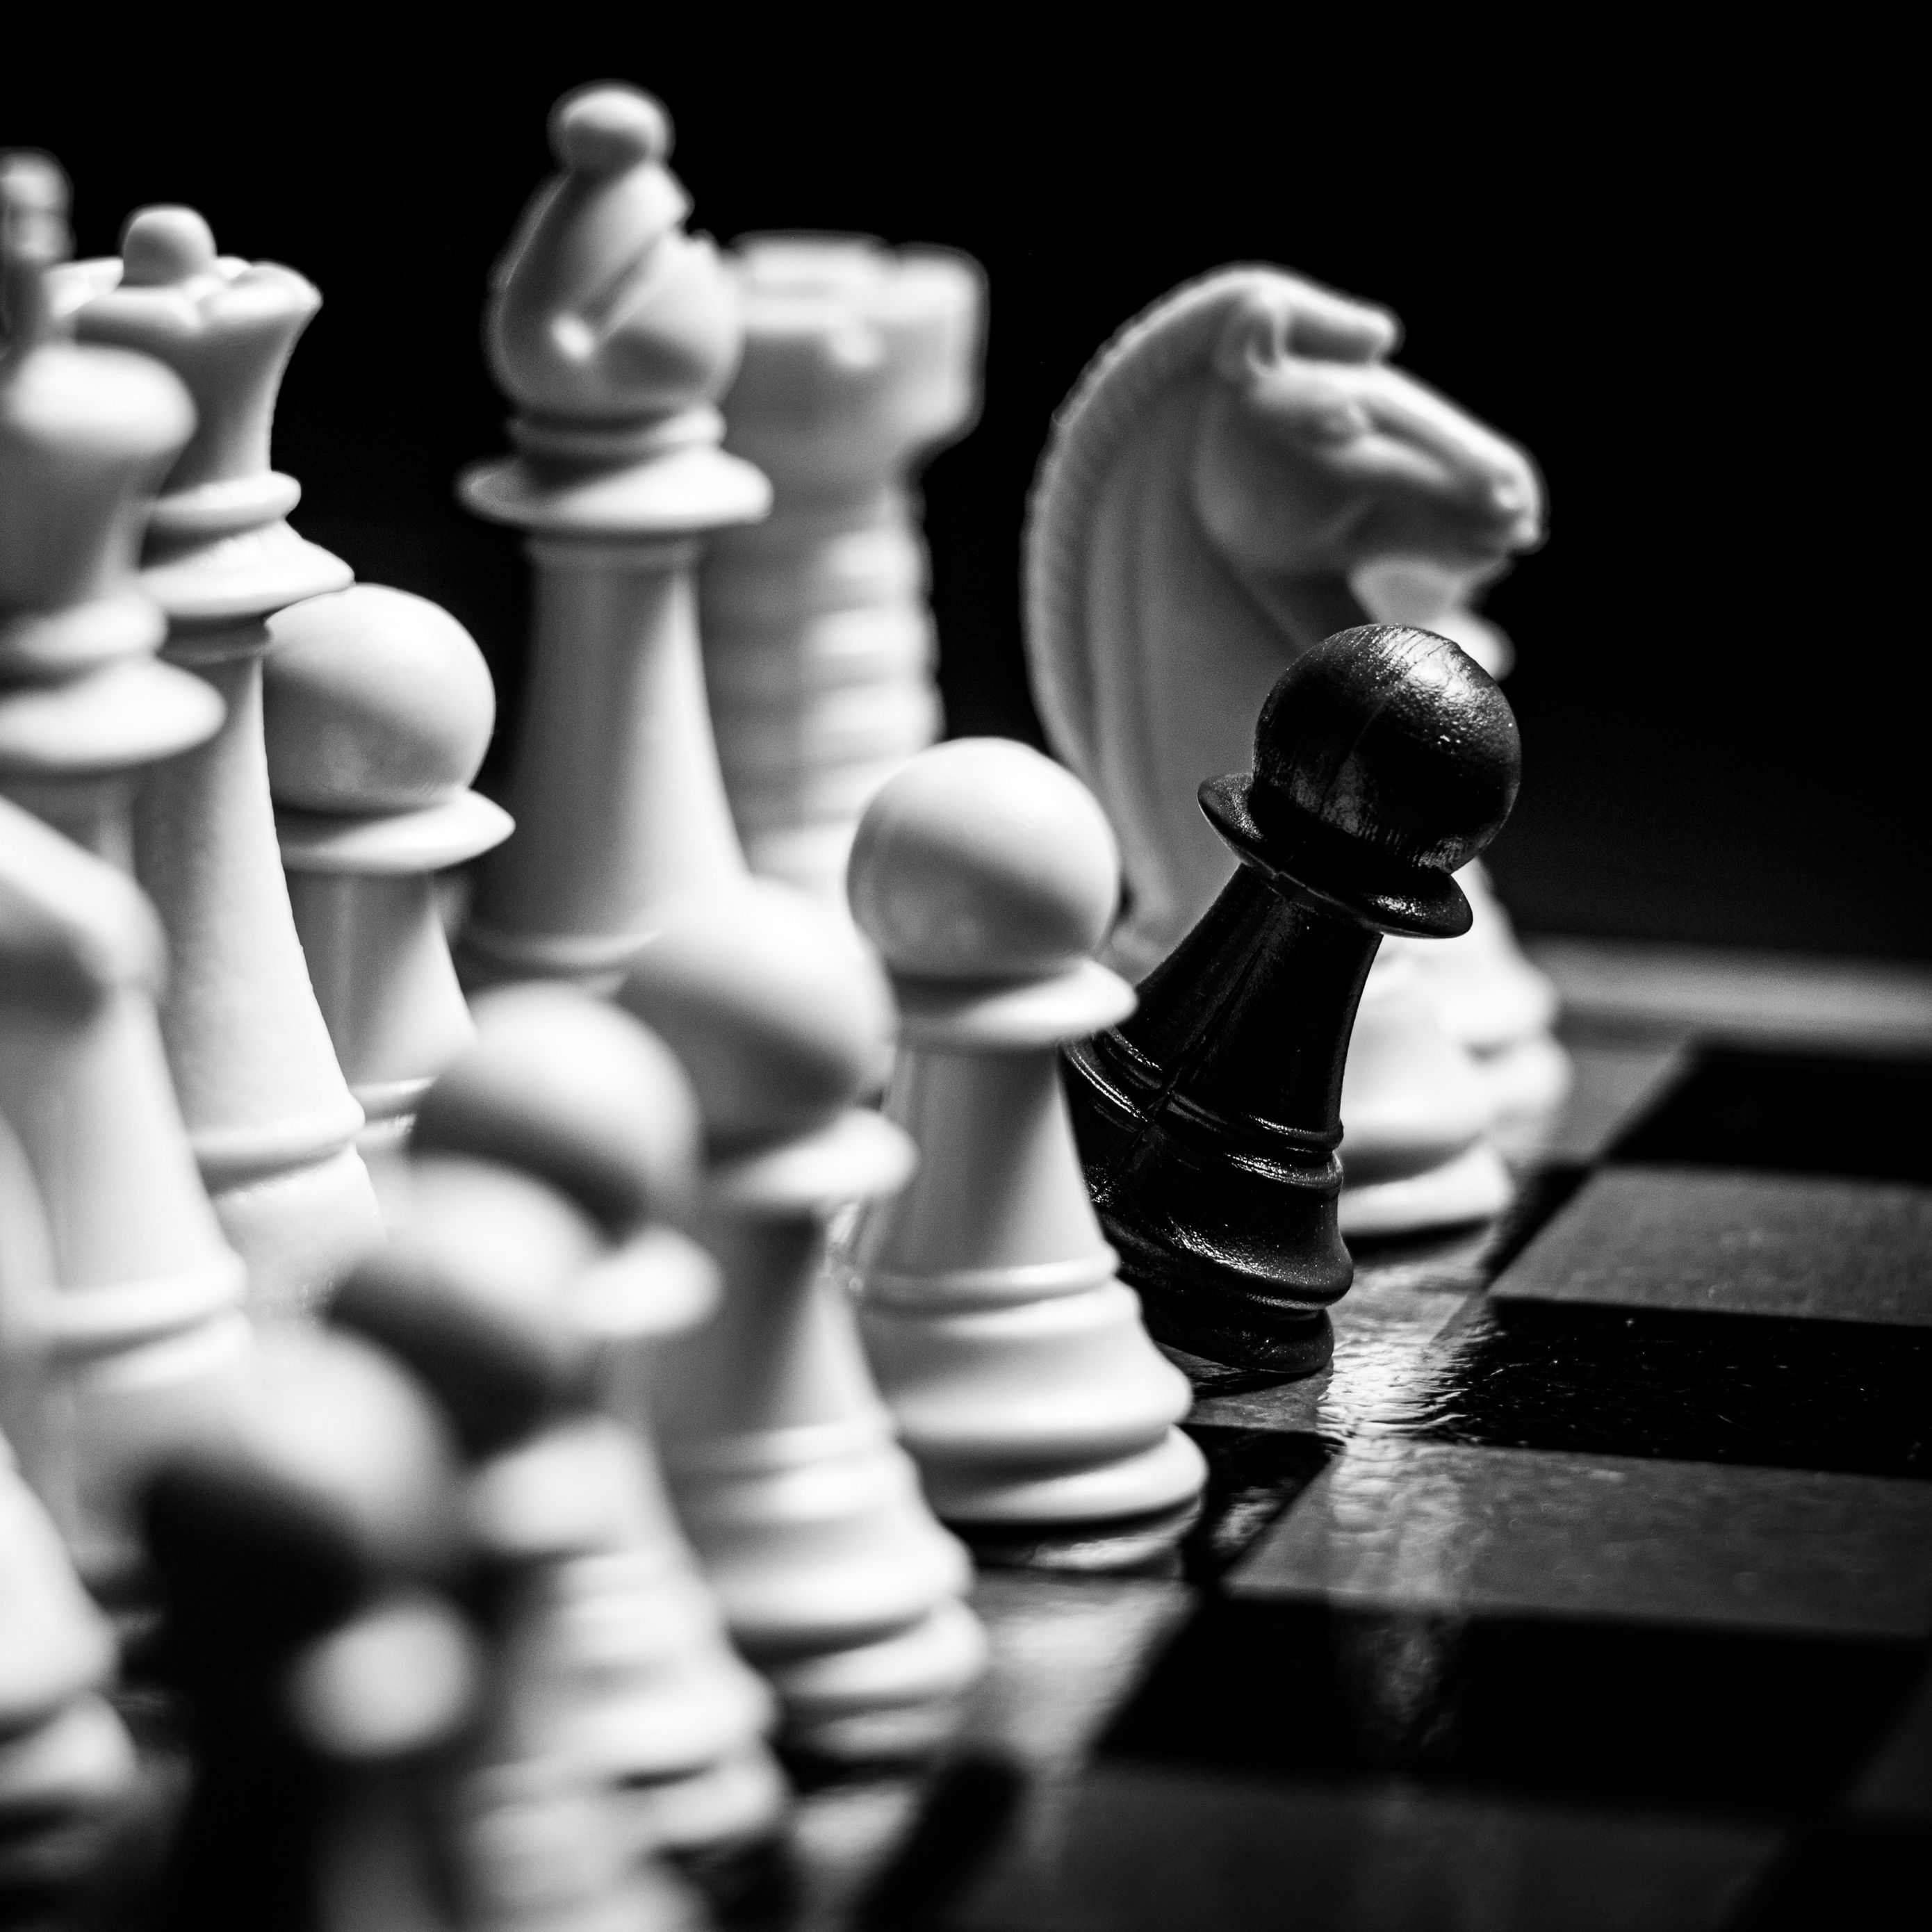 A black pawn stands out from the rest of the chess pieces - Chess